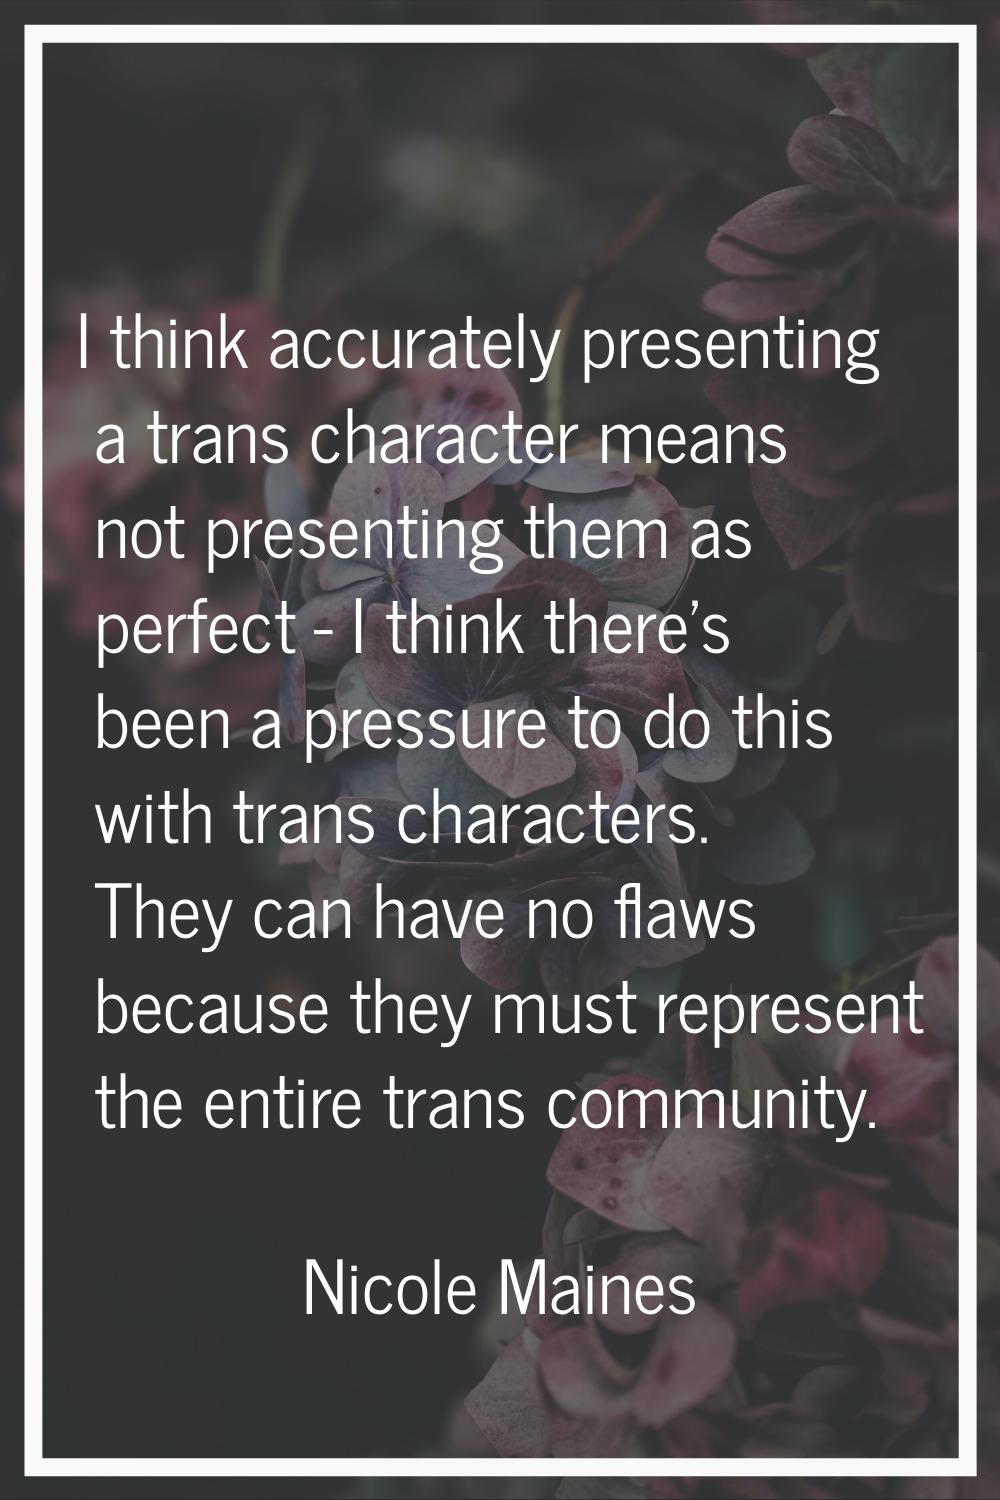 I think accurately presenting a trans character means not presenting them as perfect - I think ther